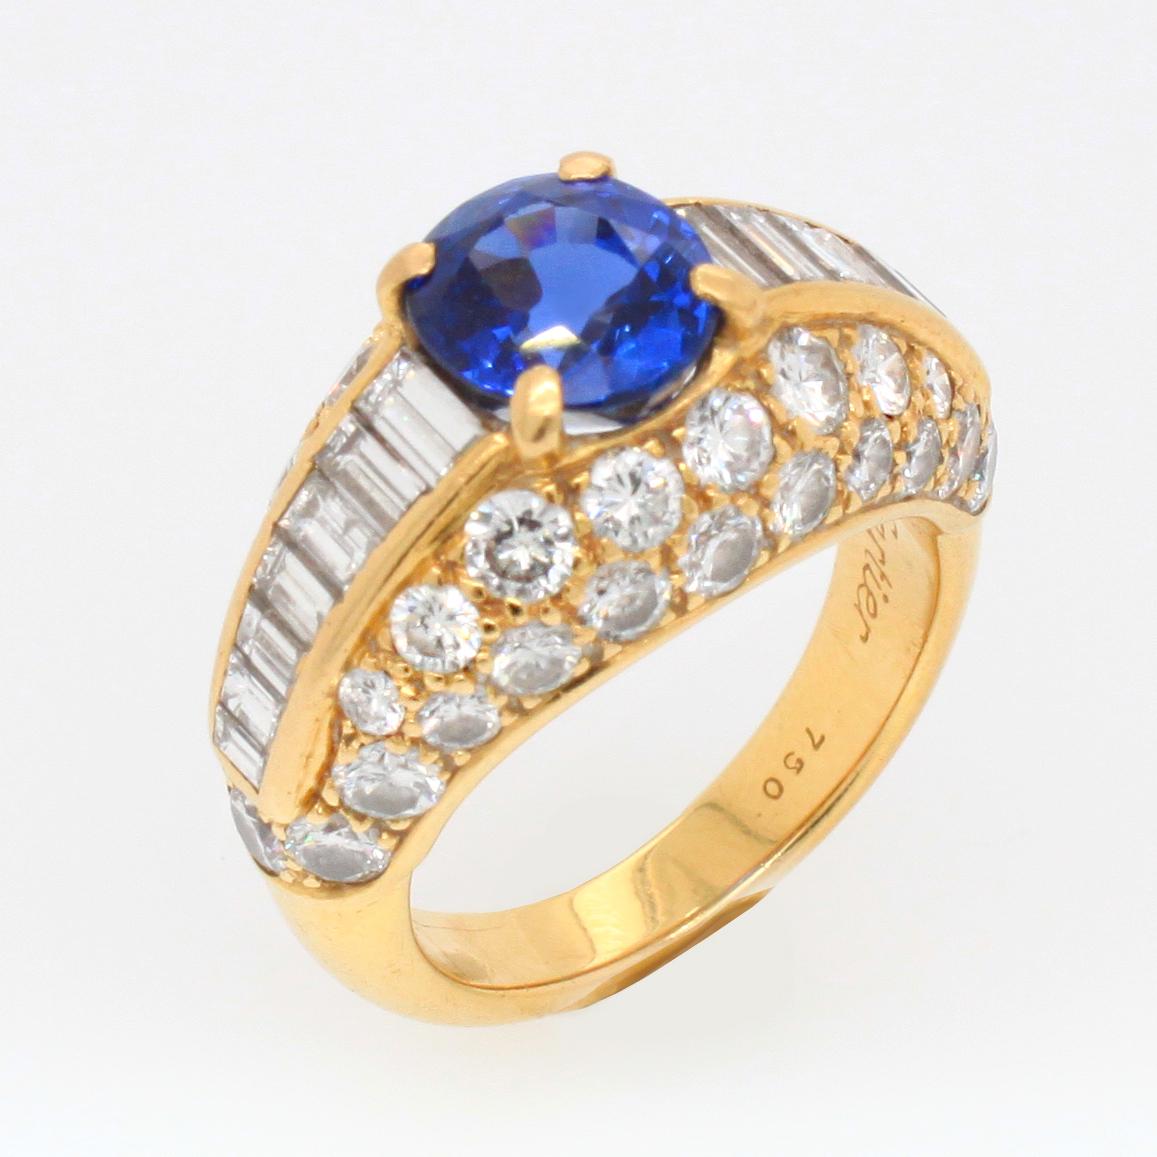 A sapphire and diamond ring in 18k yellow gold, Cartier, France 1960s. The cushion shaped sapphire is an absolutely clean gemstone with a beautiful intense blue colour. It is of Ceylon origin and natural, not heat treated - accompanied by a